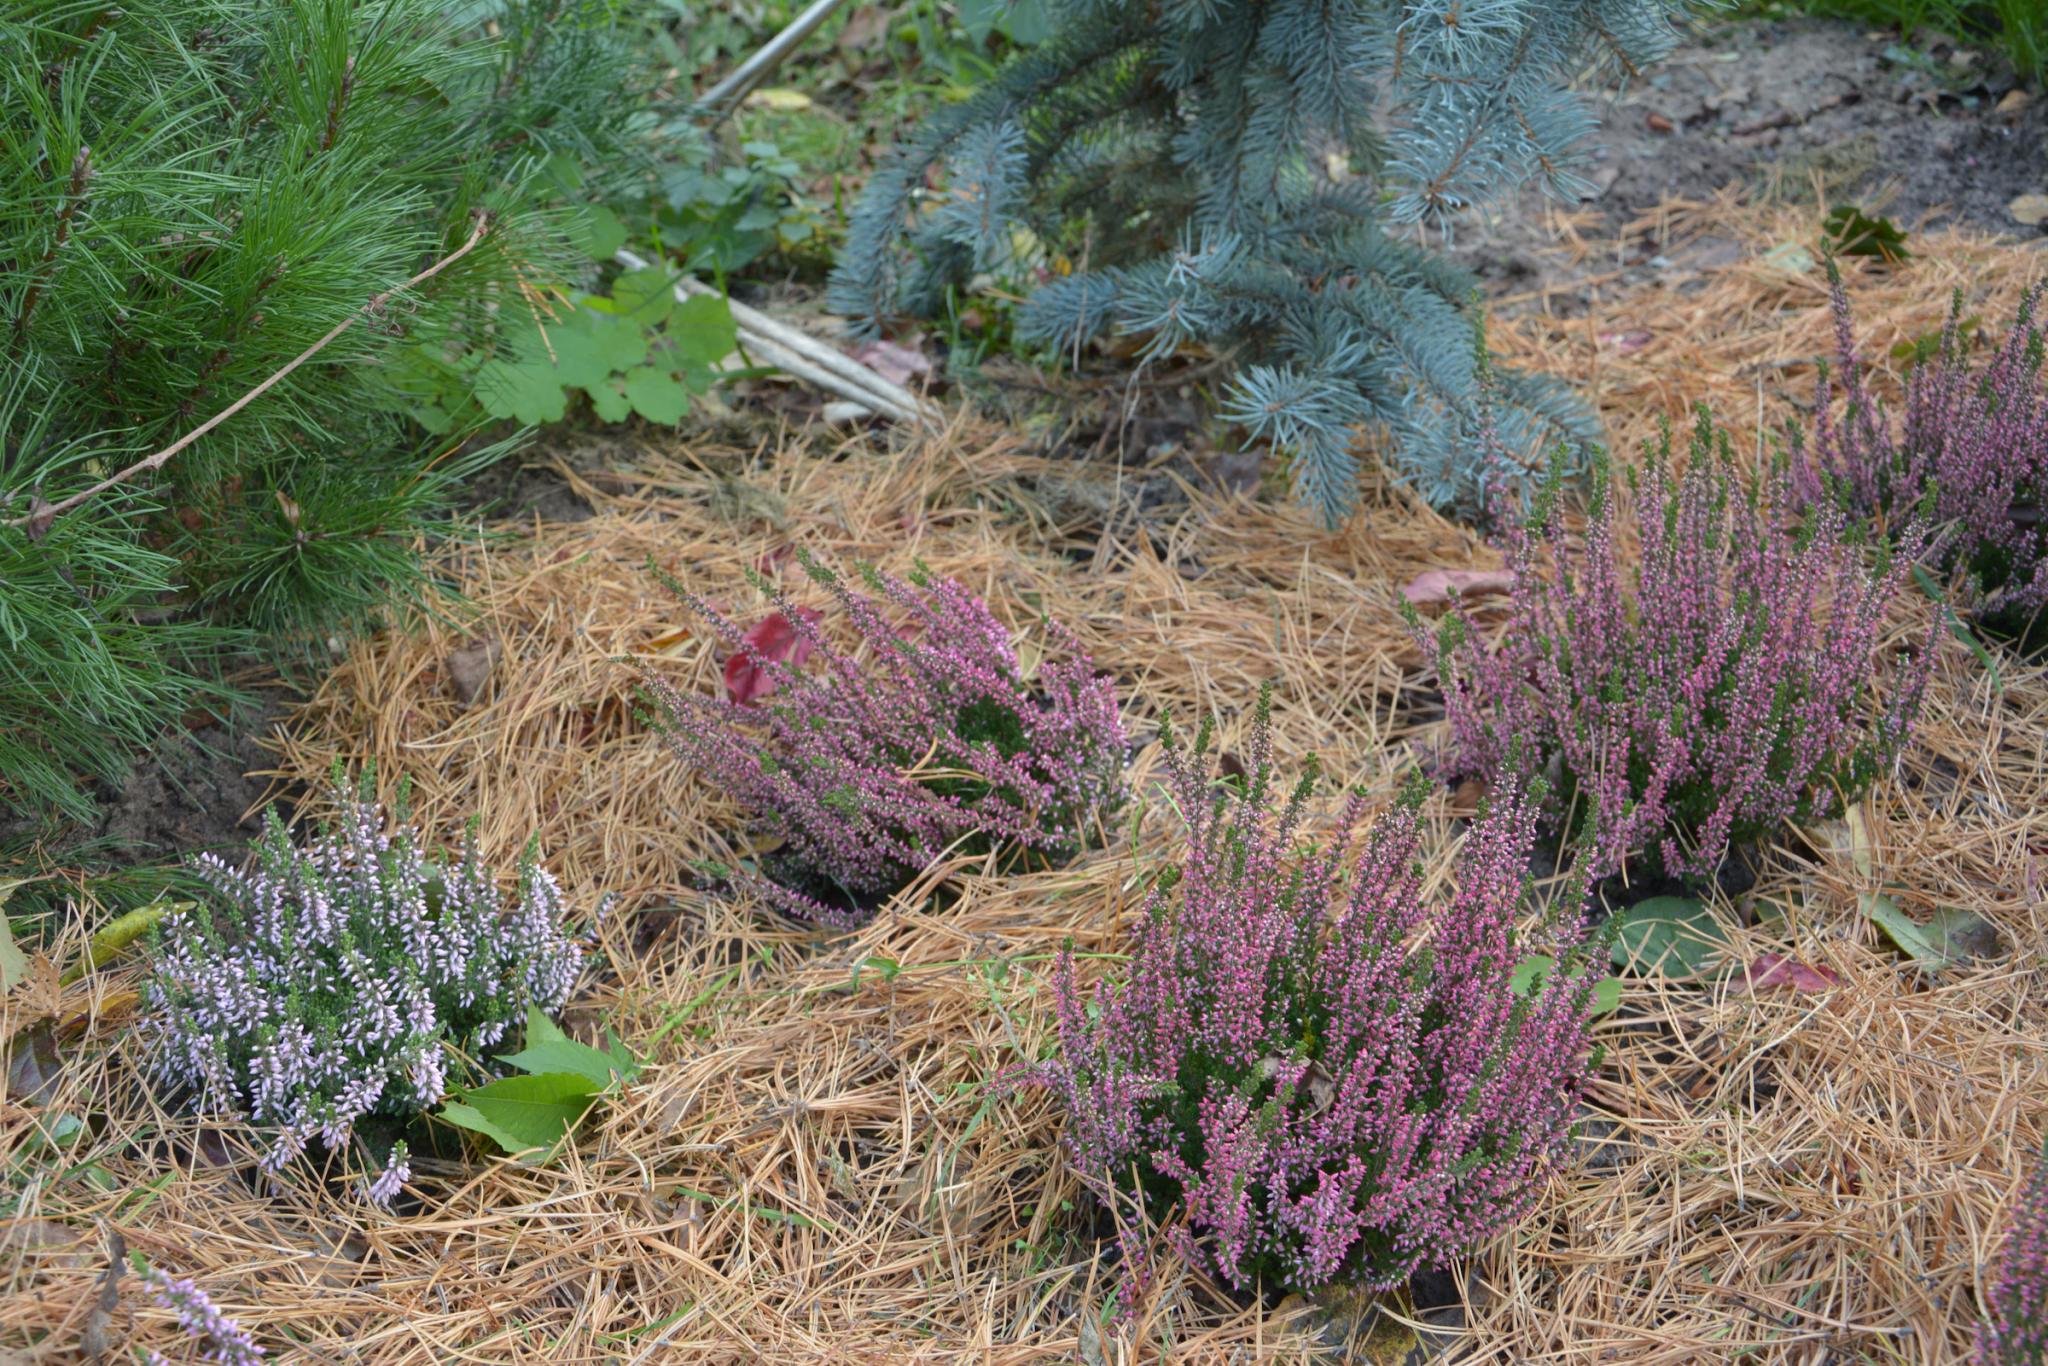 Heather plants insulated with pine needles for wintering. Credit: V. Shulikovskiy